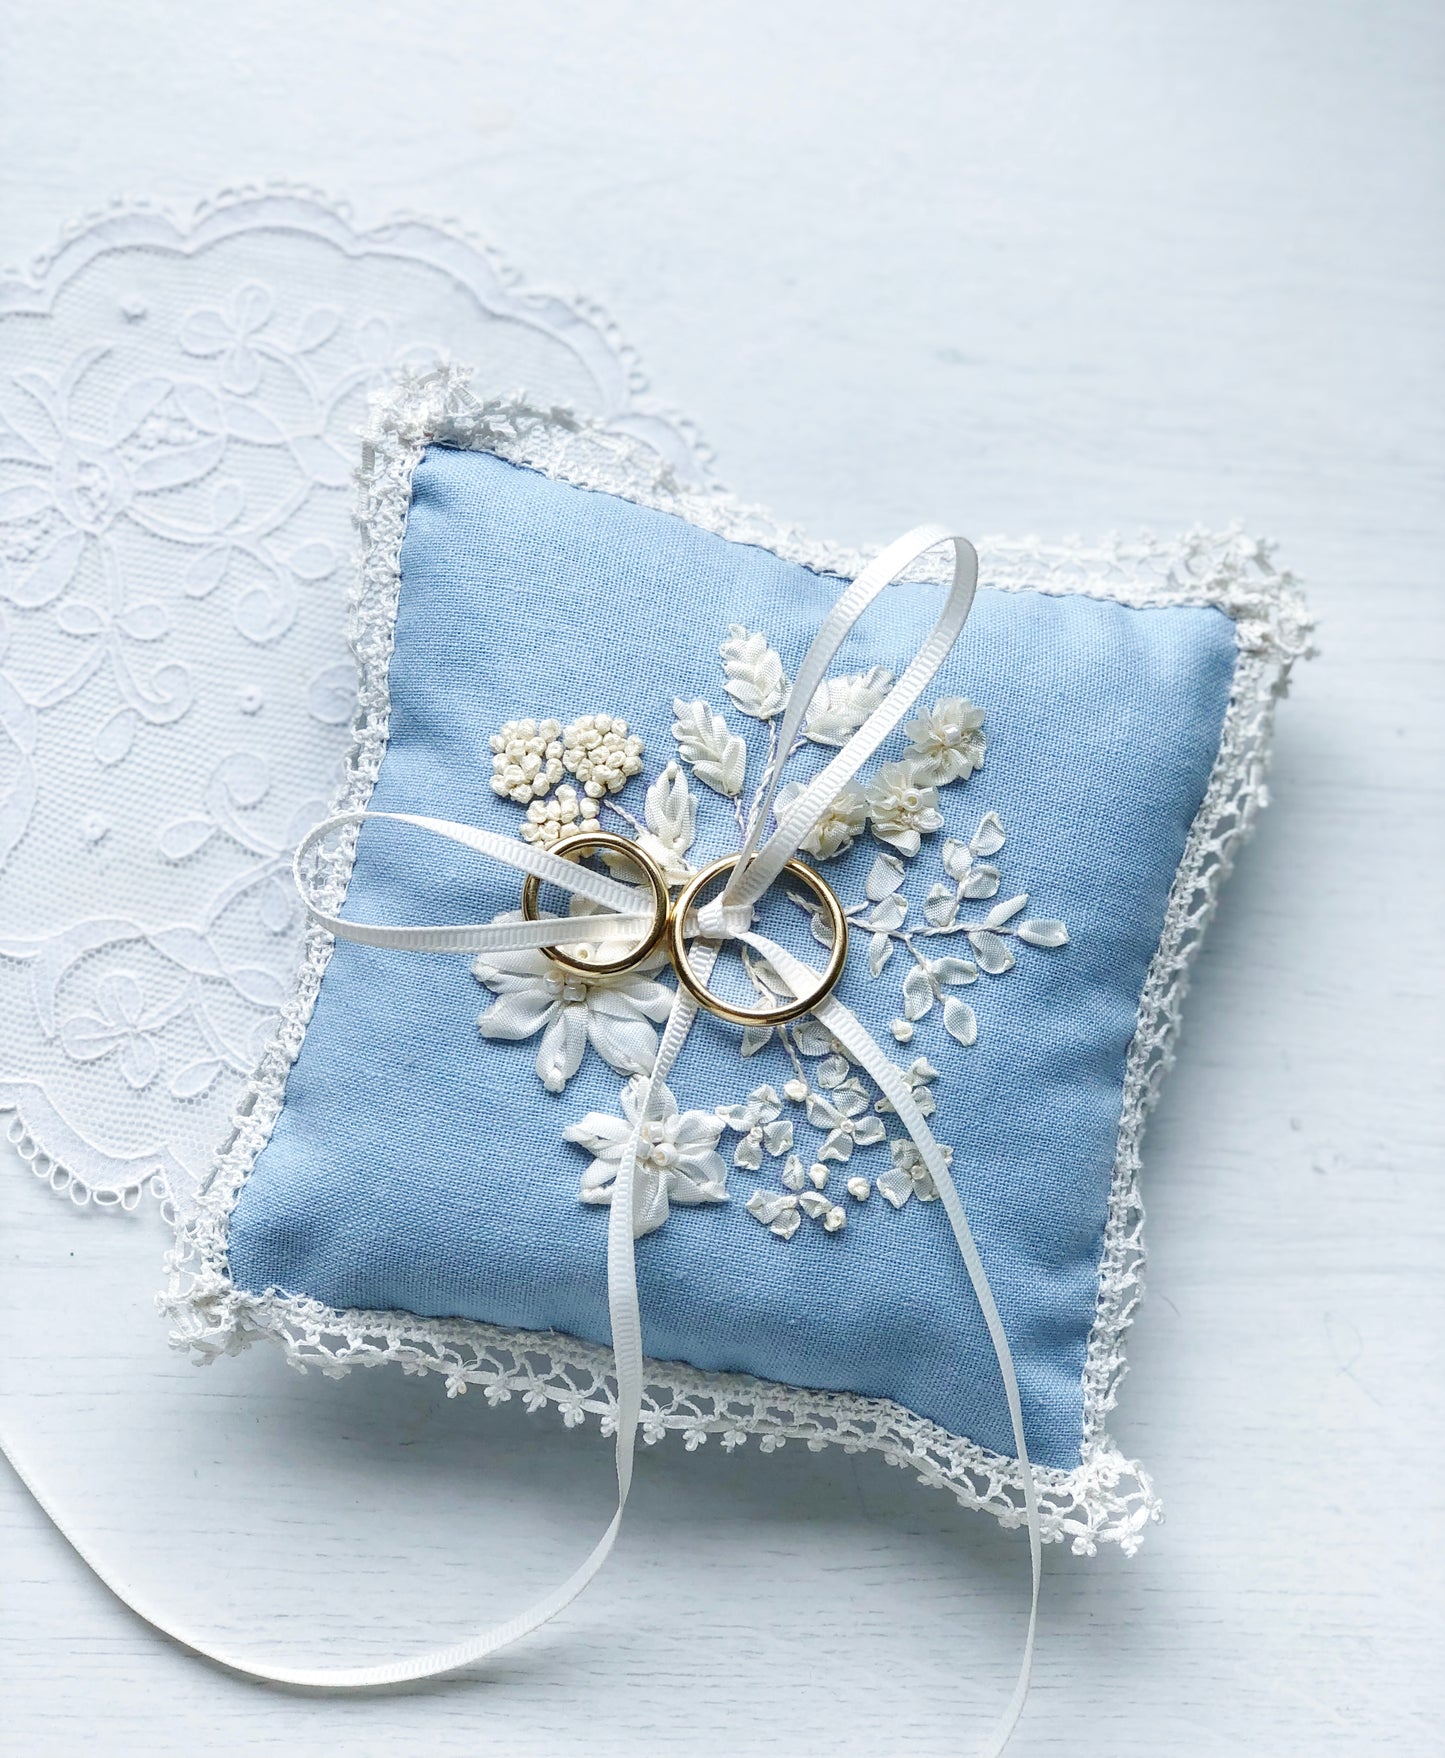 Edwardian embroidered floral ring pillow in porcelain blue